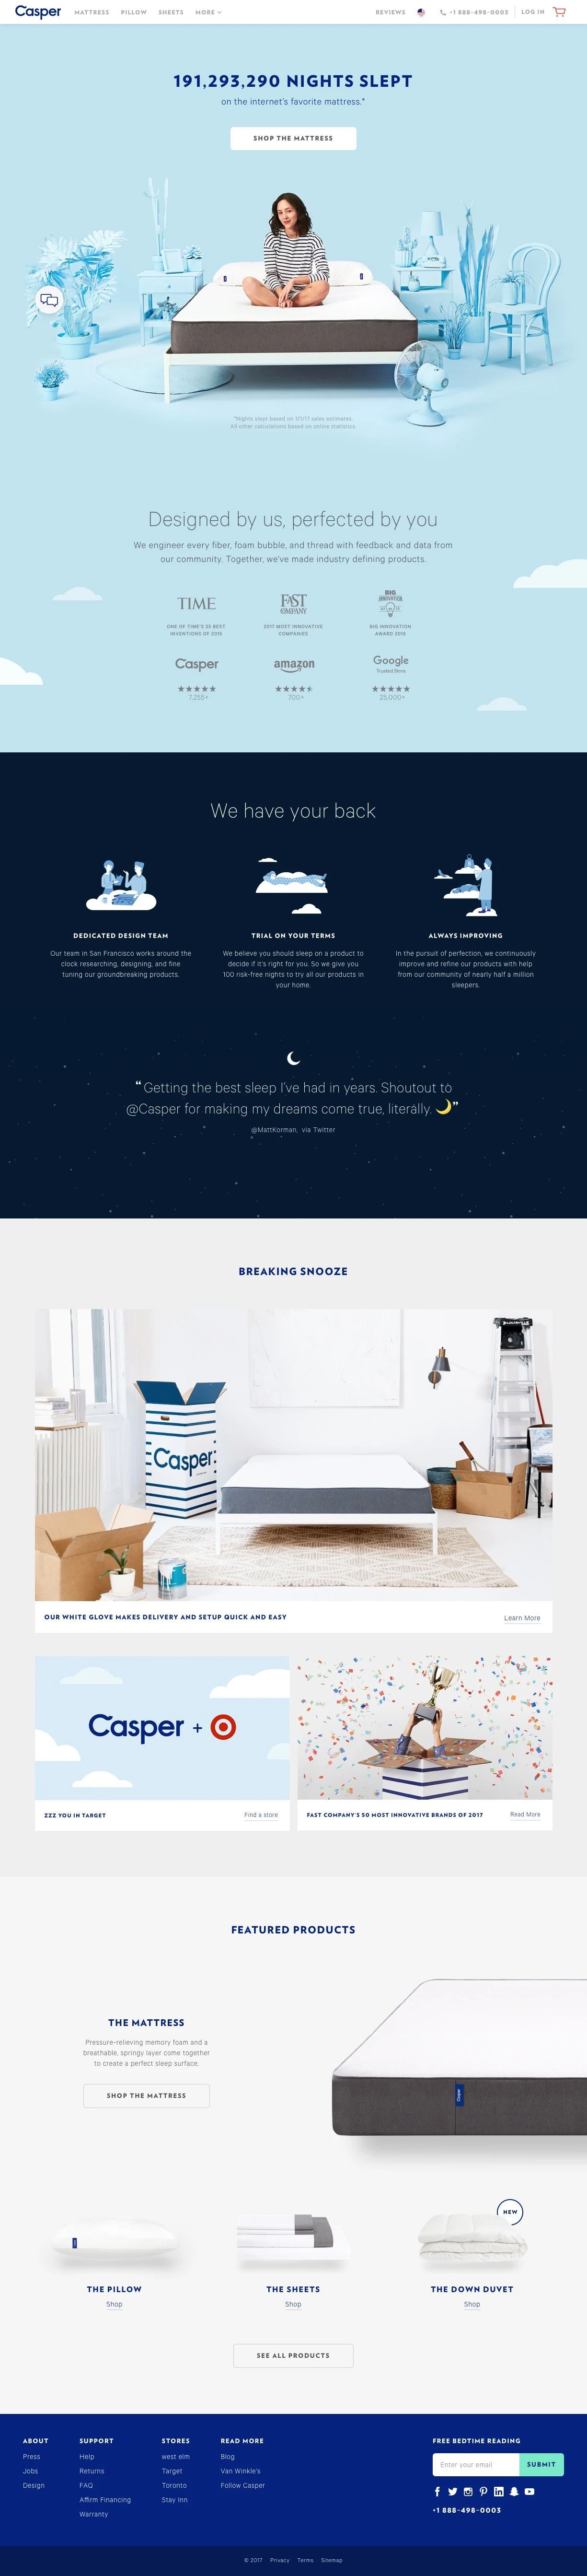 Casper Landing Page Example: An obsessively engineered mattress at a shockingly fair price. Try sleeping on a Casper for 100 days, with free delivery and painless returns.